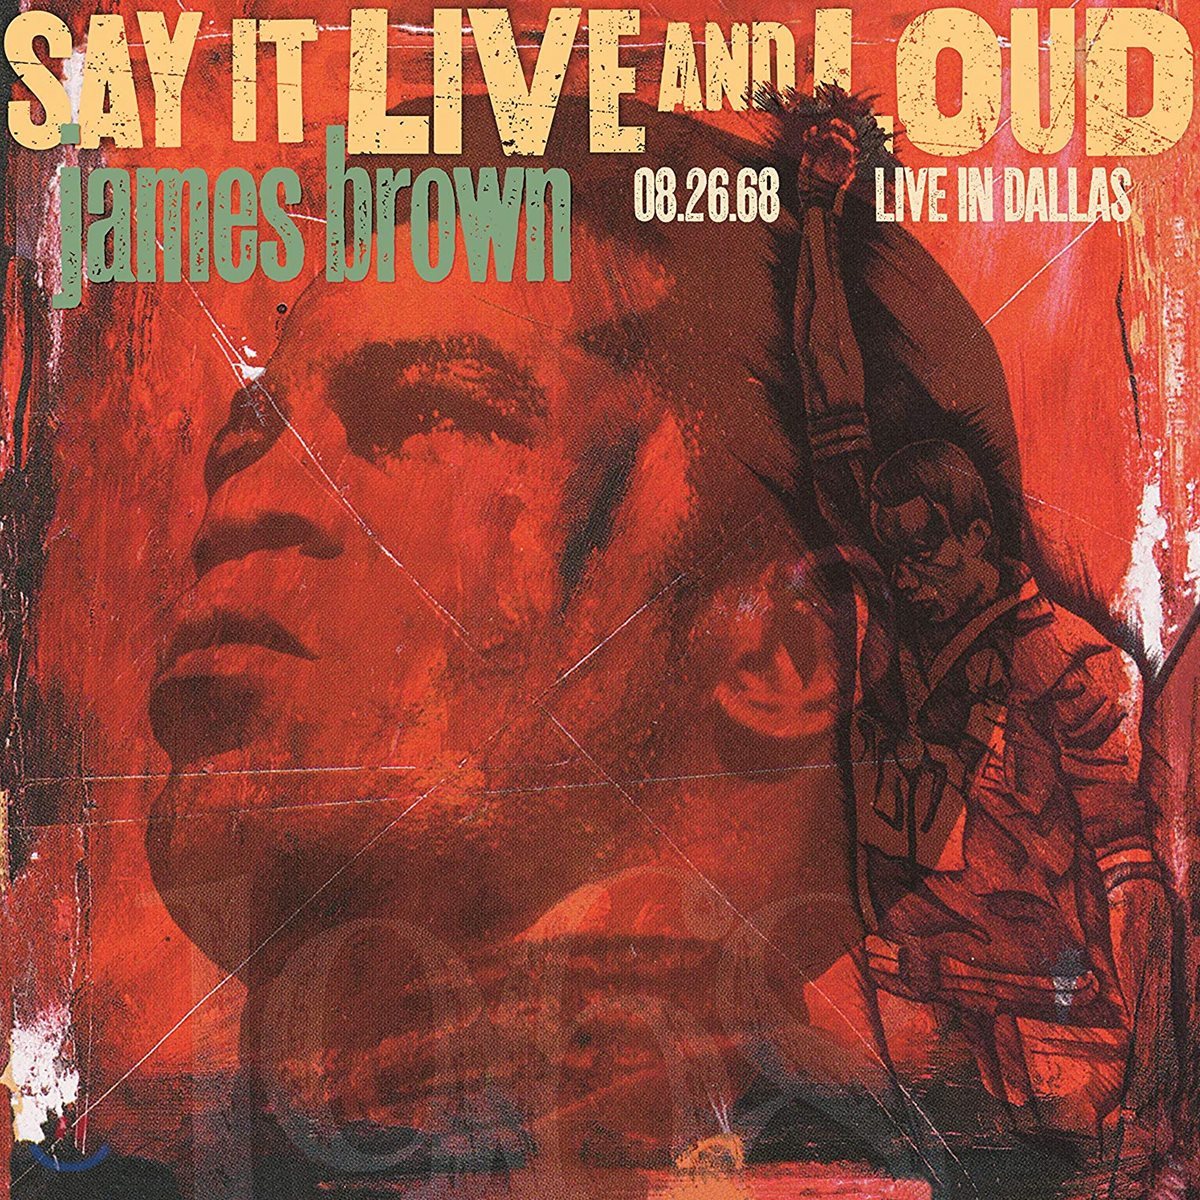 James Brown (제임스 브라운) - Say It Live And Loud: Live In Dallas 08.26.68 [2LP]